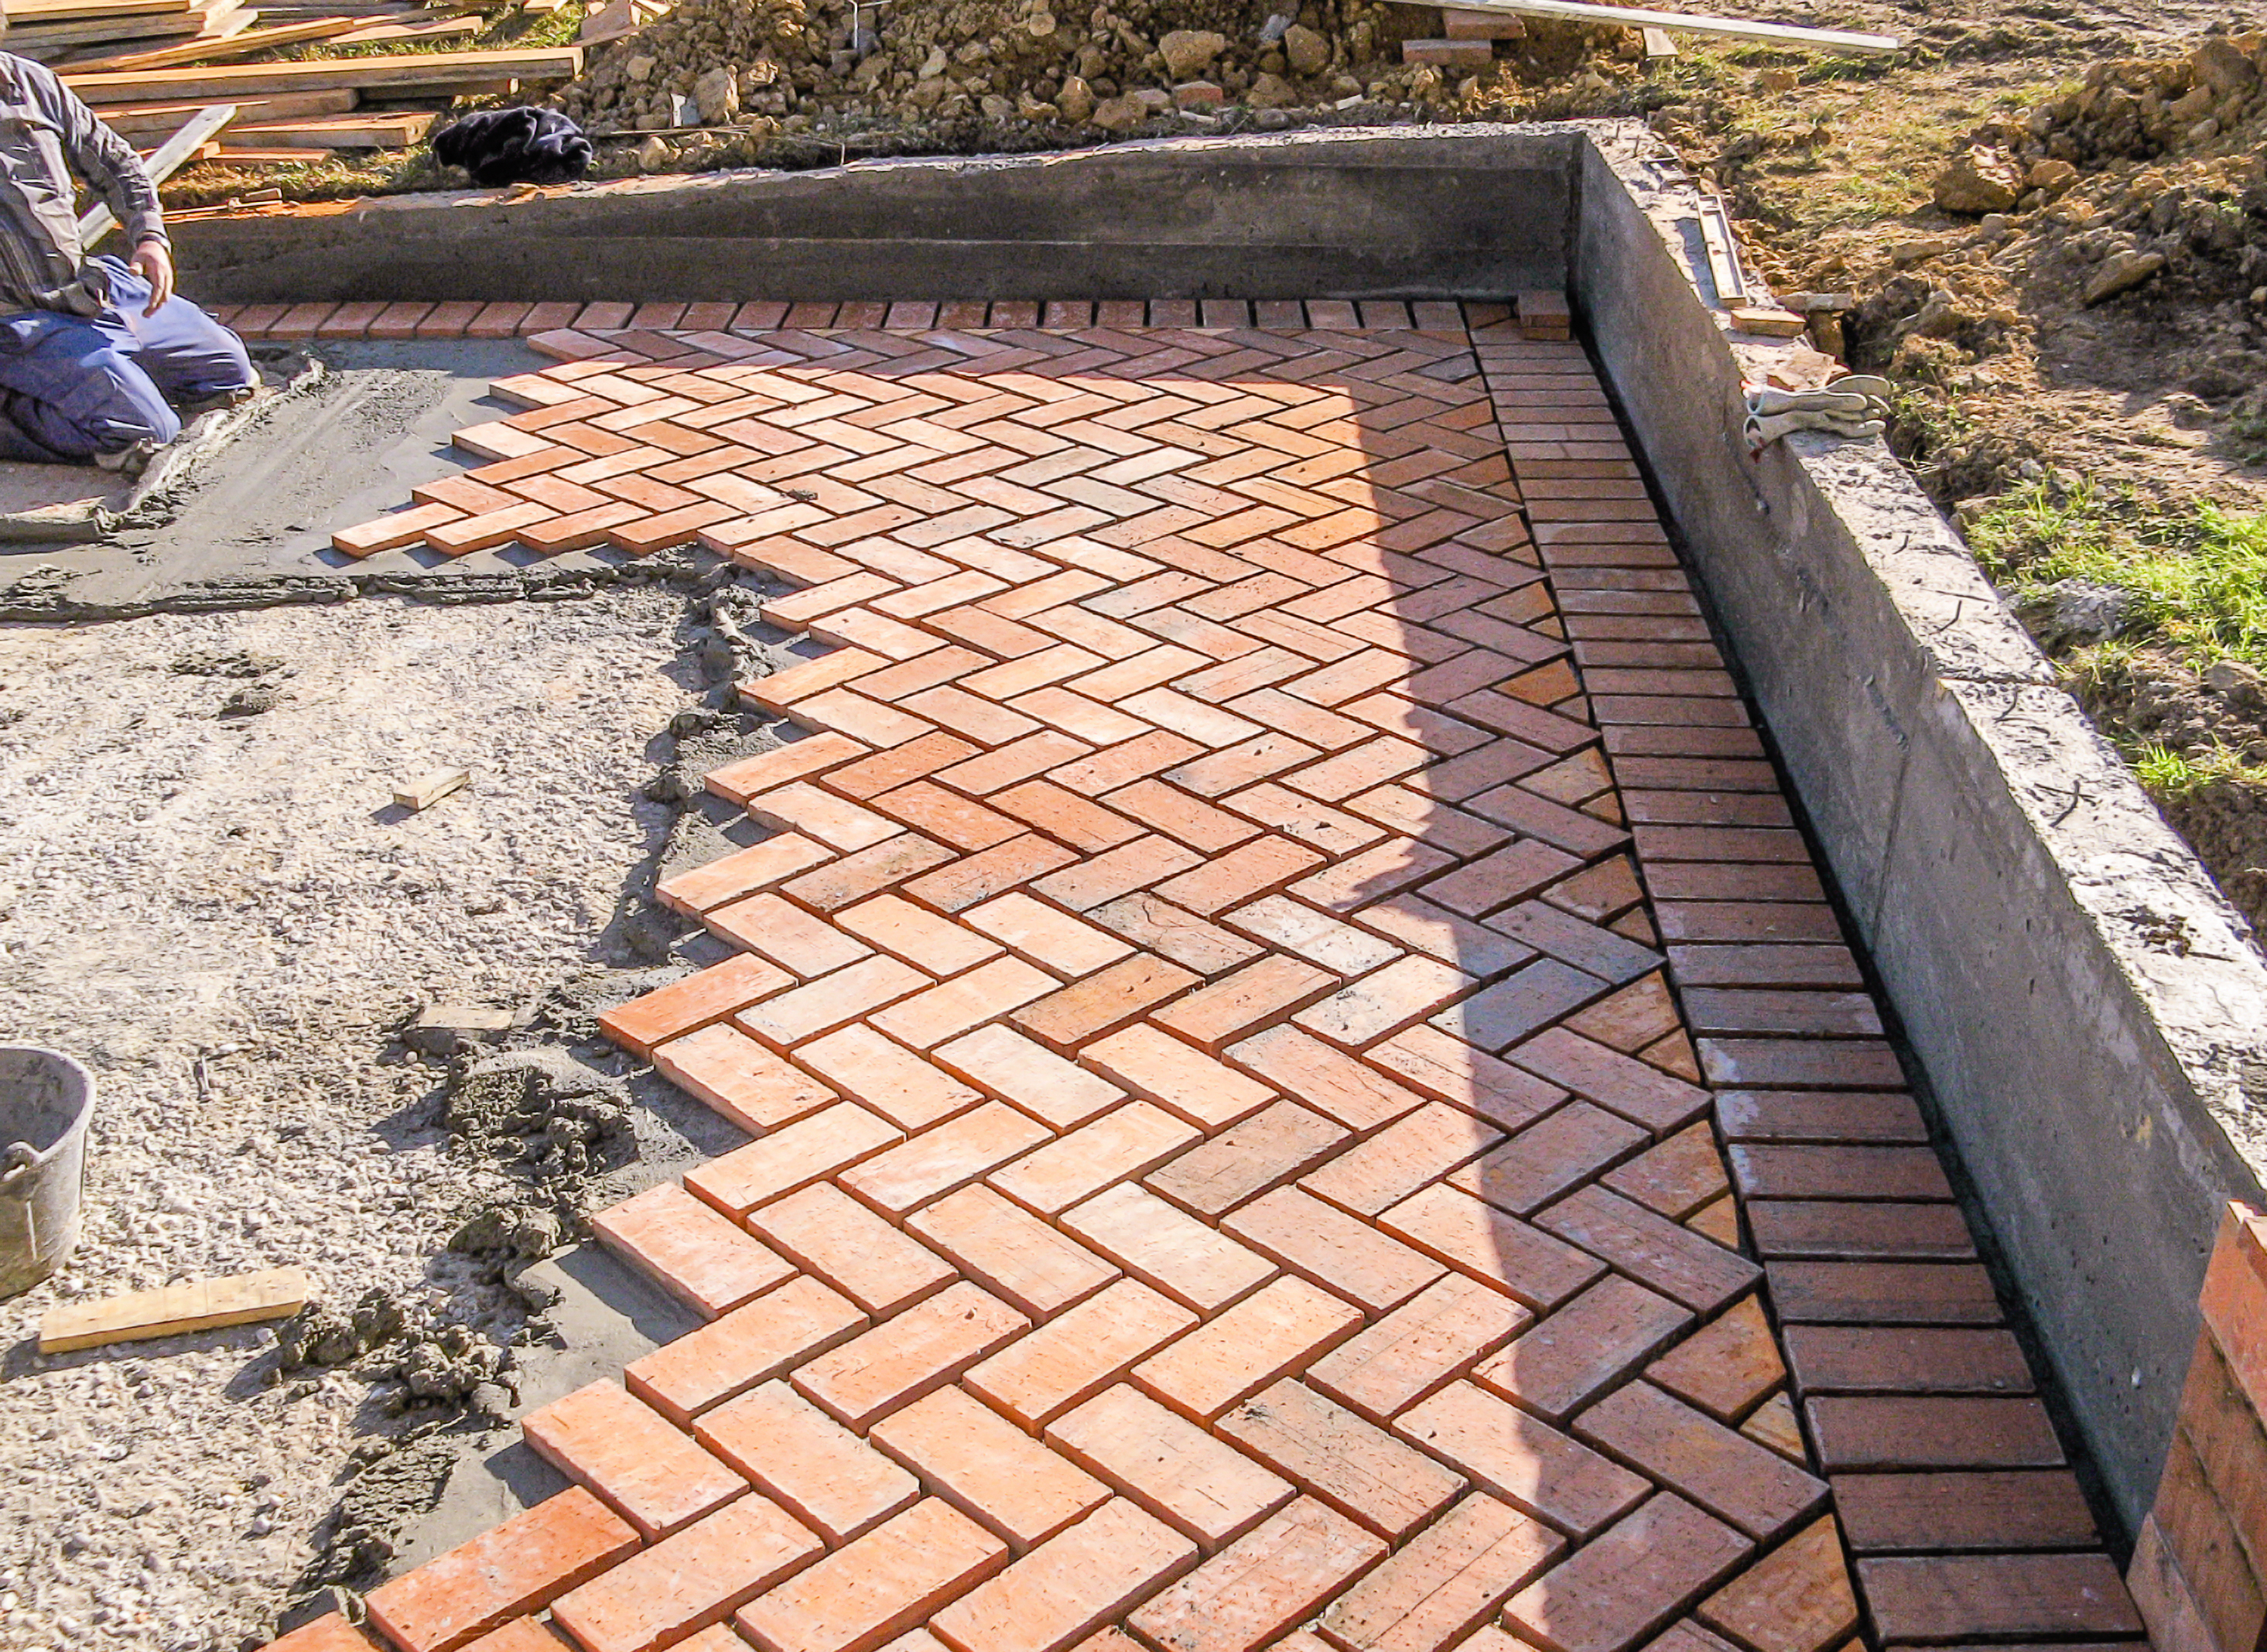 Monmouth county Paver PAtios